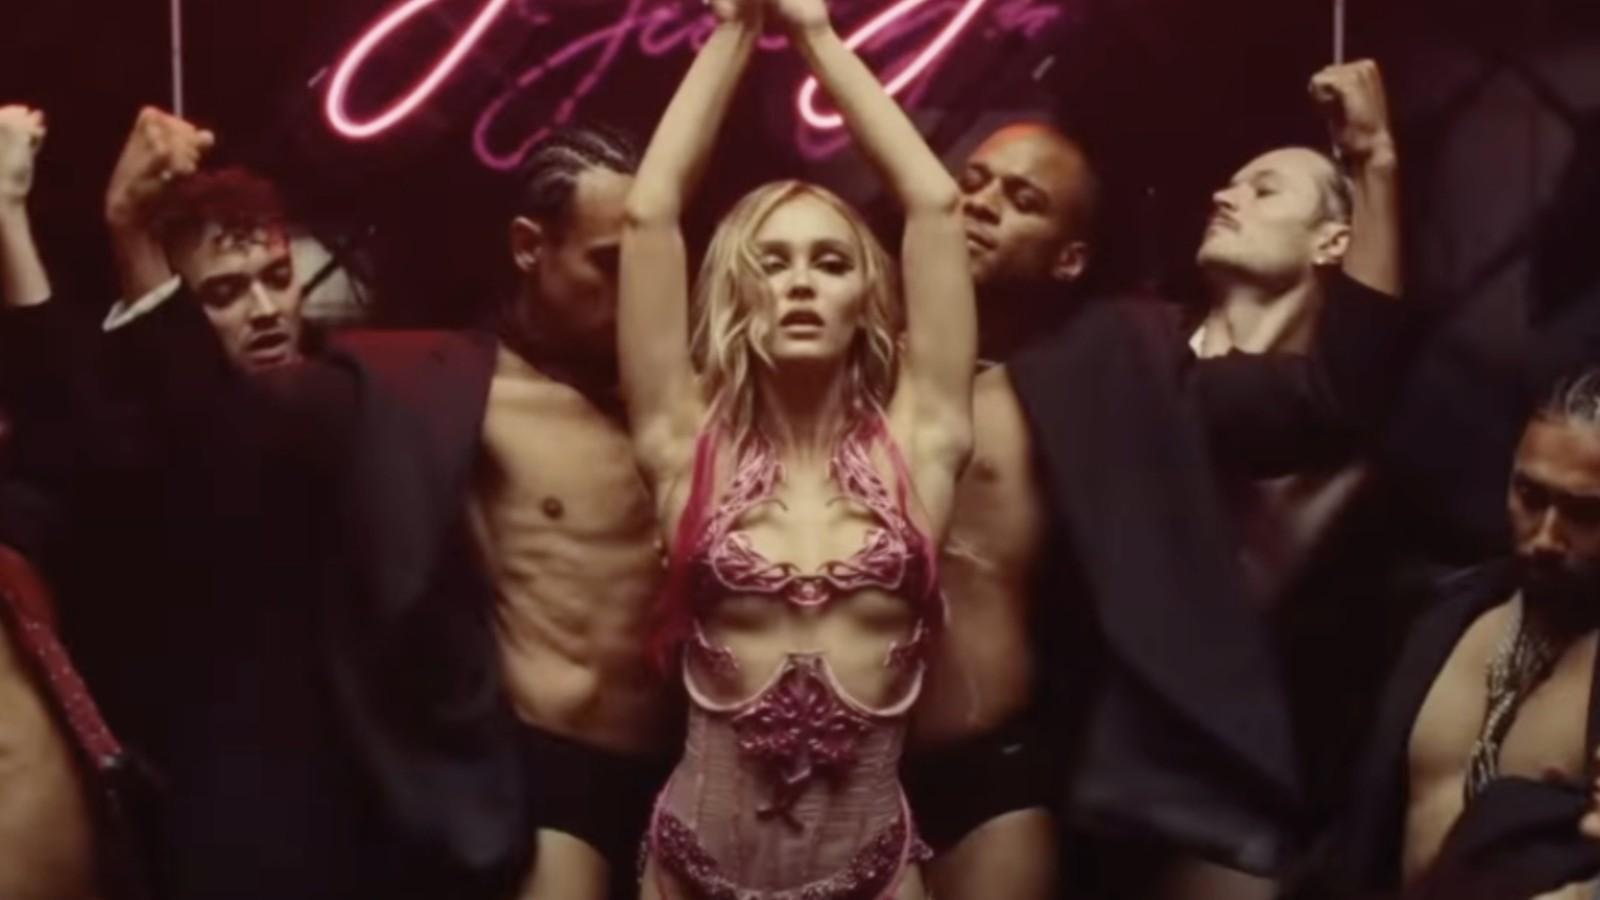 Lily rose depp tits the idol